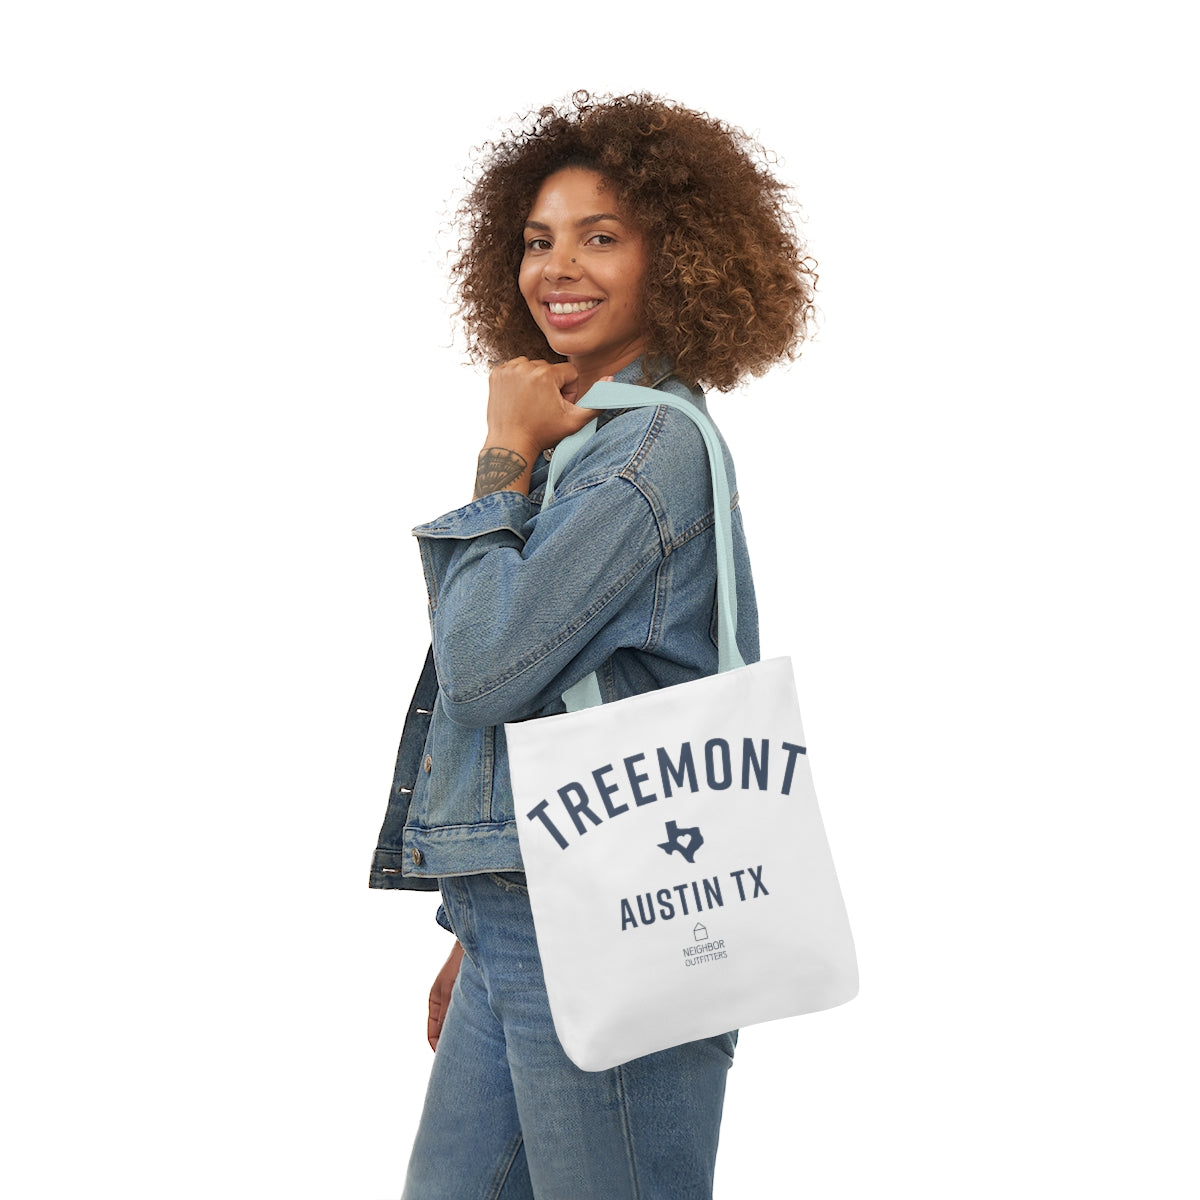 Treemont Tote Bag - "Full Hearts"